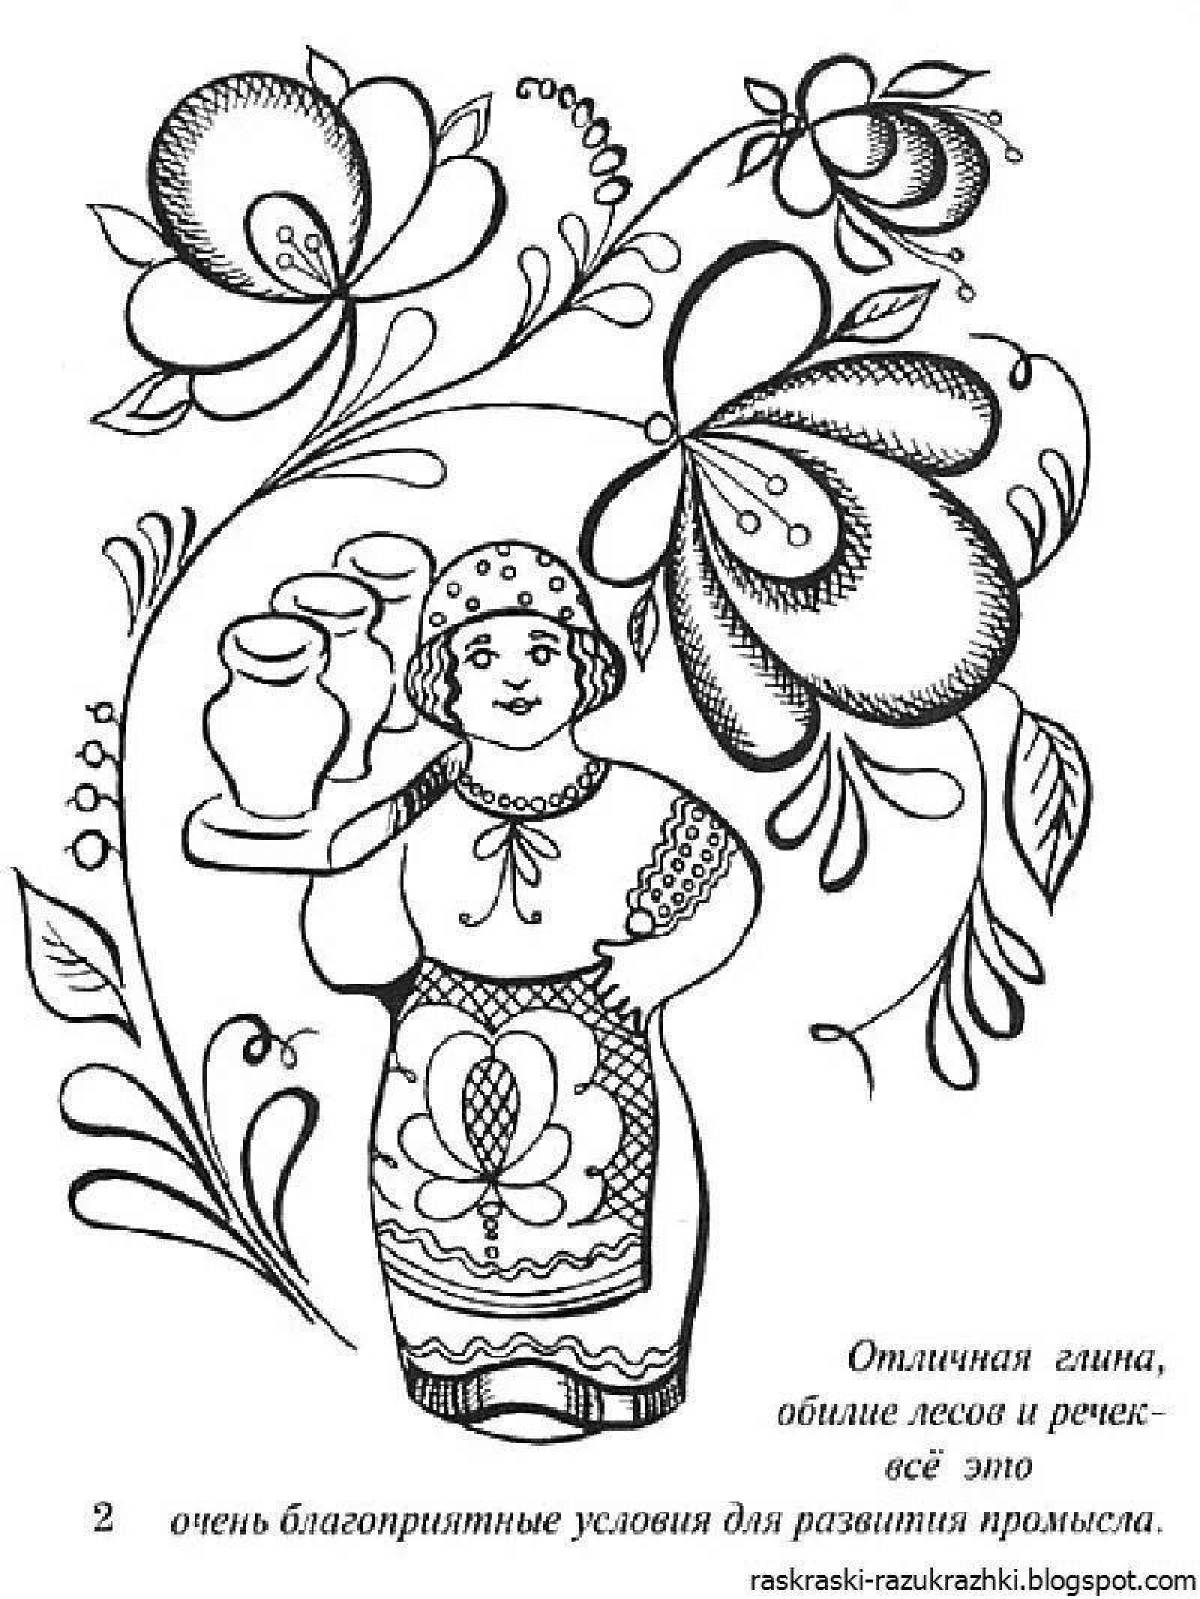 Adorable Russian folk art coloring book for kids